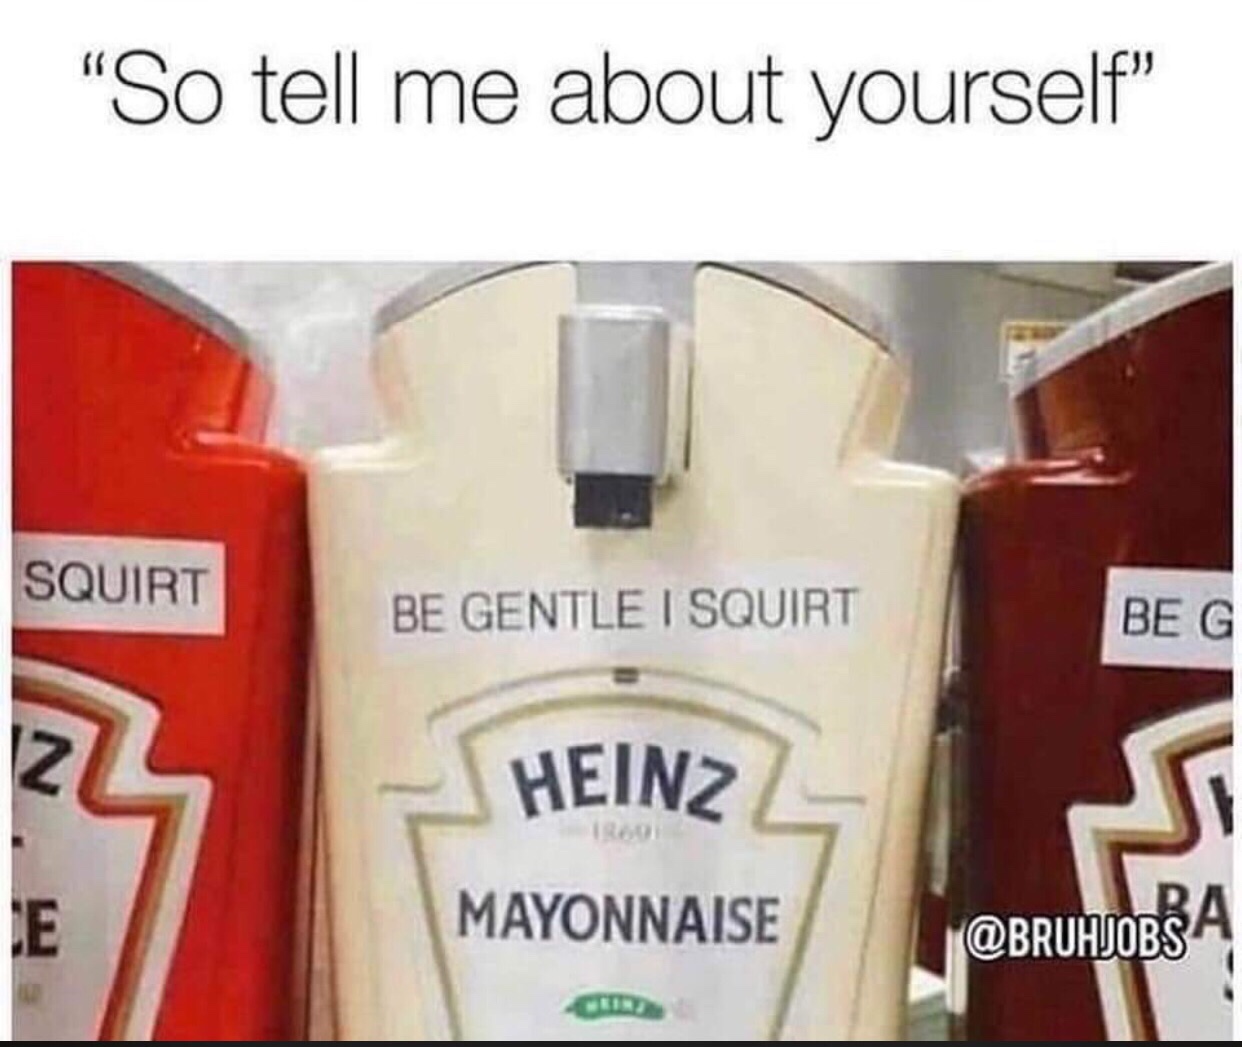 squirt meme - "So tell me about yourself Squirt Be Gentle I Squirt Beg Heinz Mayonnaise